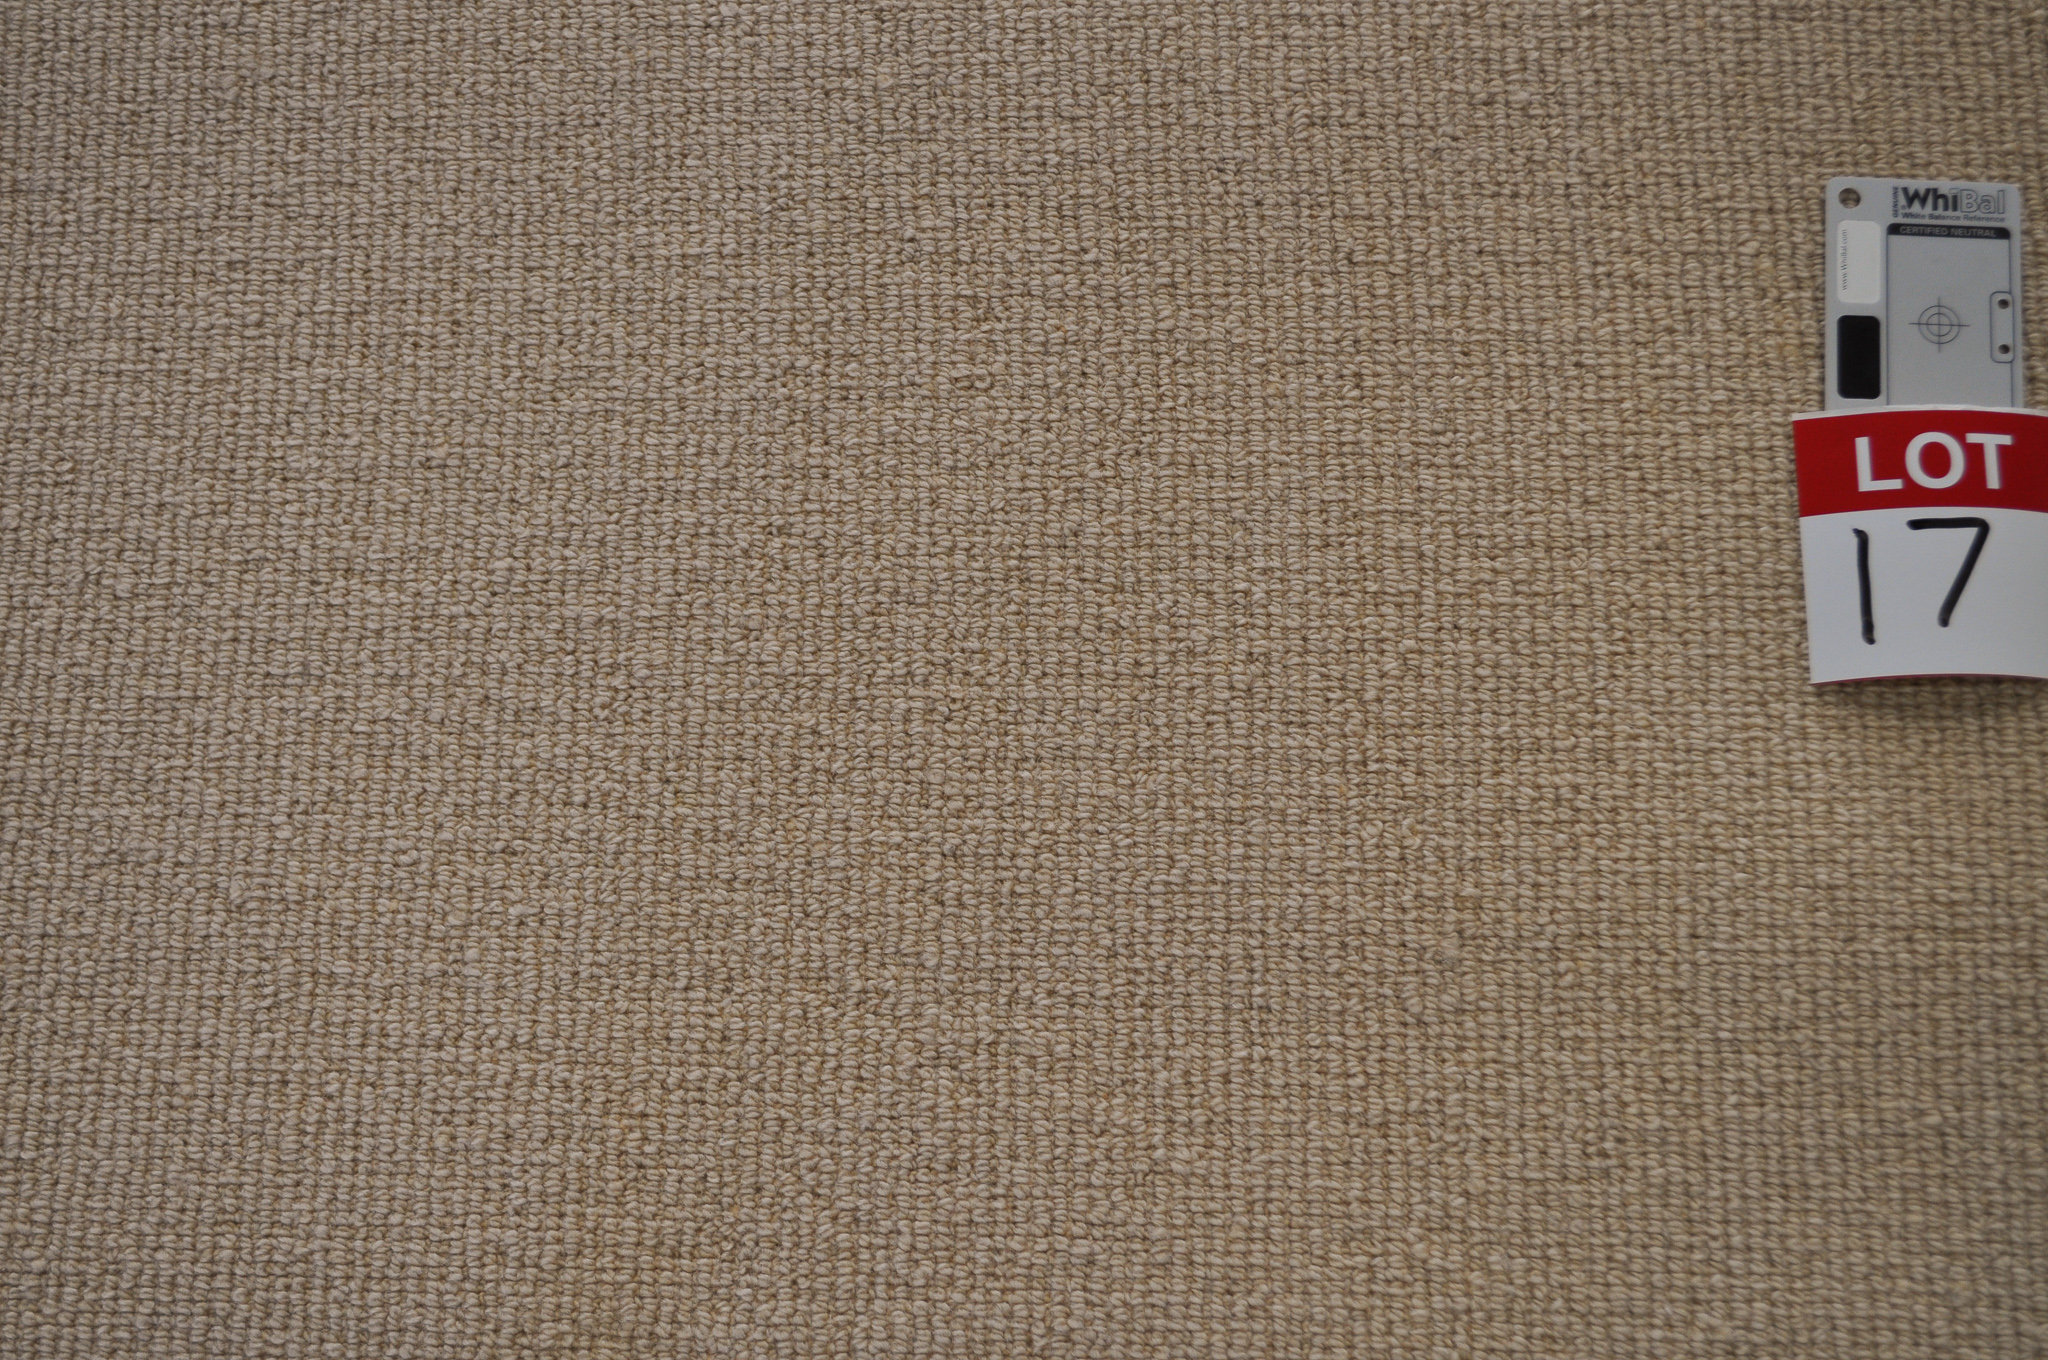 yellow beige colored, sisal pile, roll of carpet on sale at Concord Floors, it being a remnant roll in Concord Floor's warehouse.